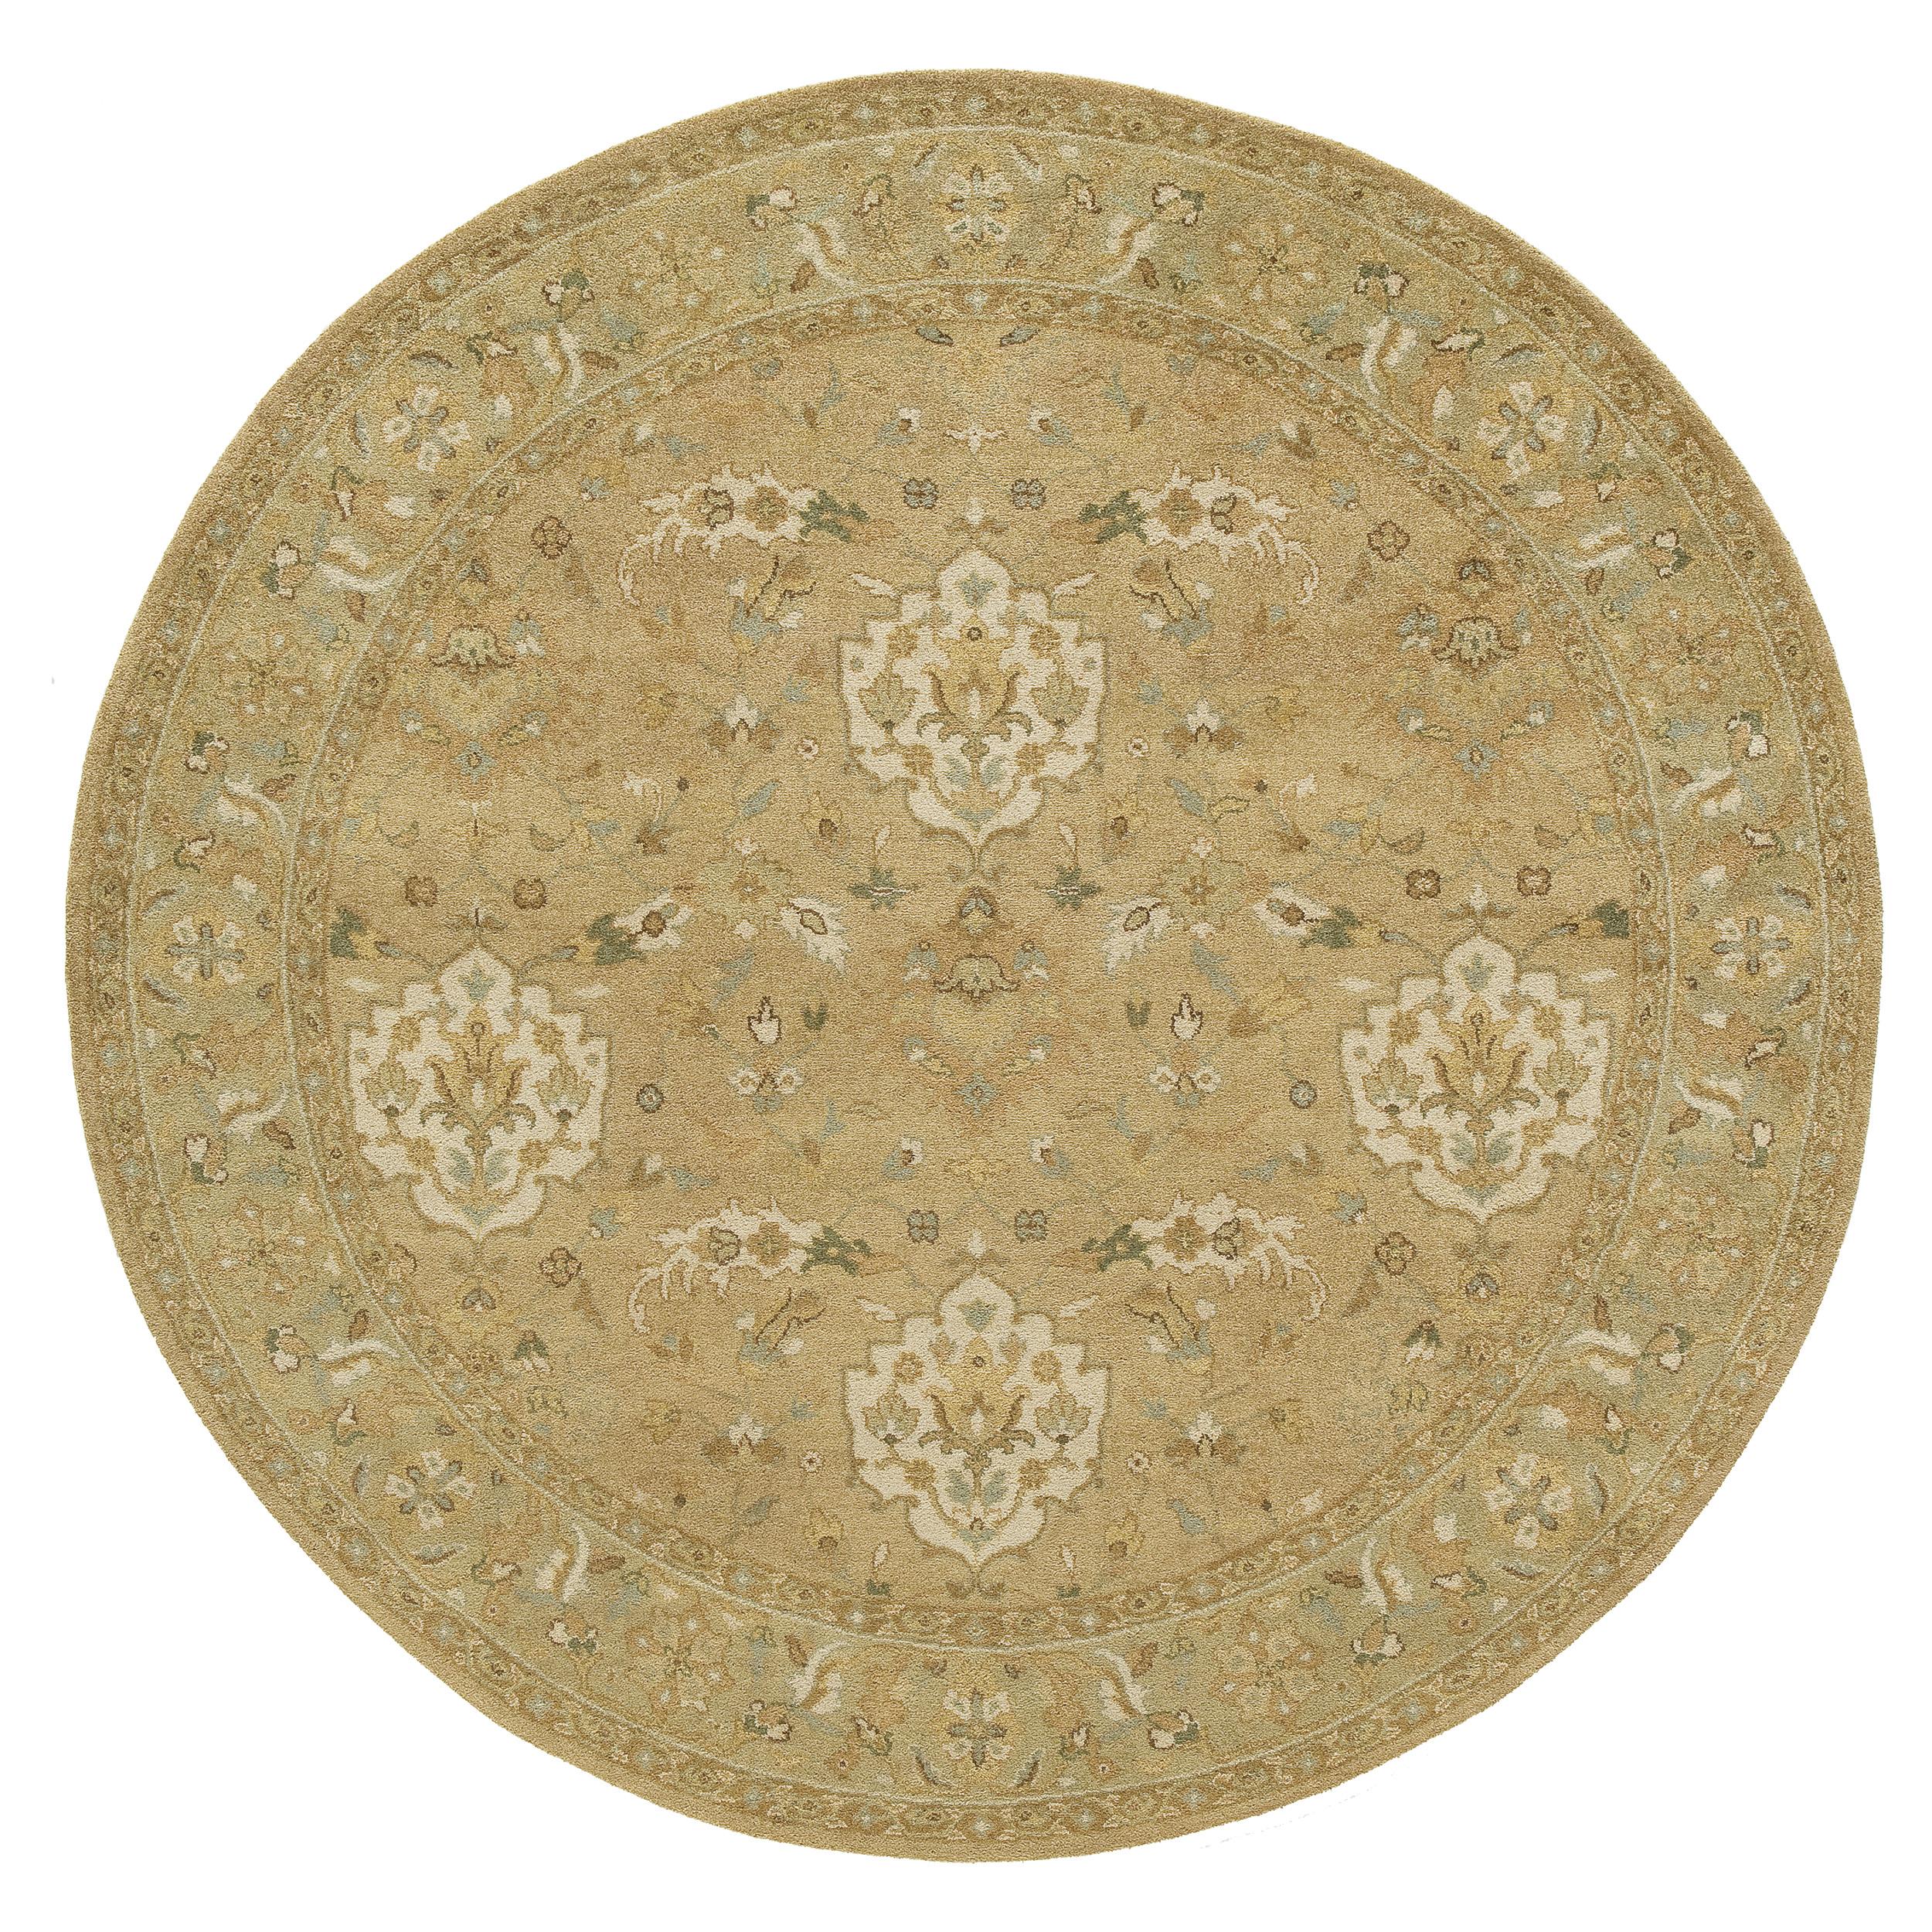 Luxury Traditional Hand-Knotted Shield Beige & Opal 12x12 Round Rug